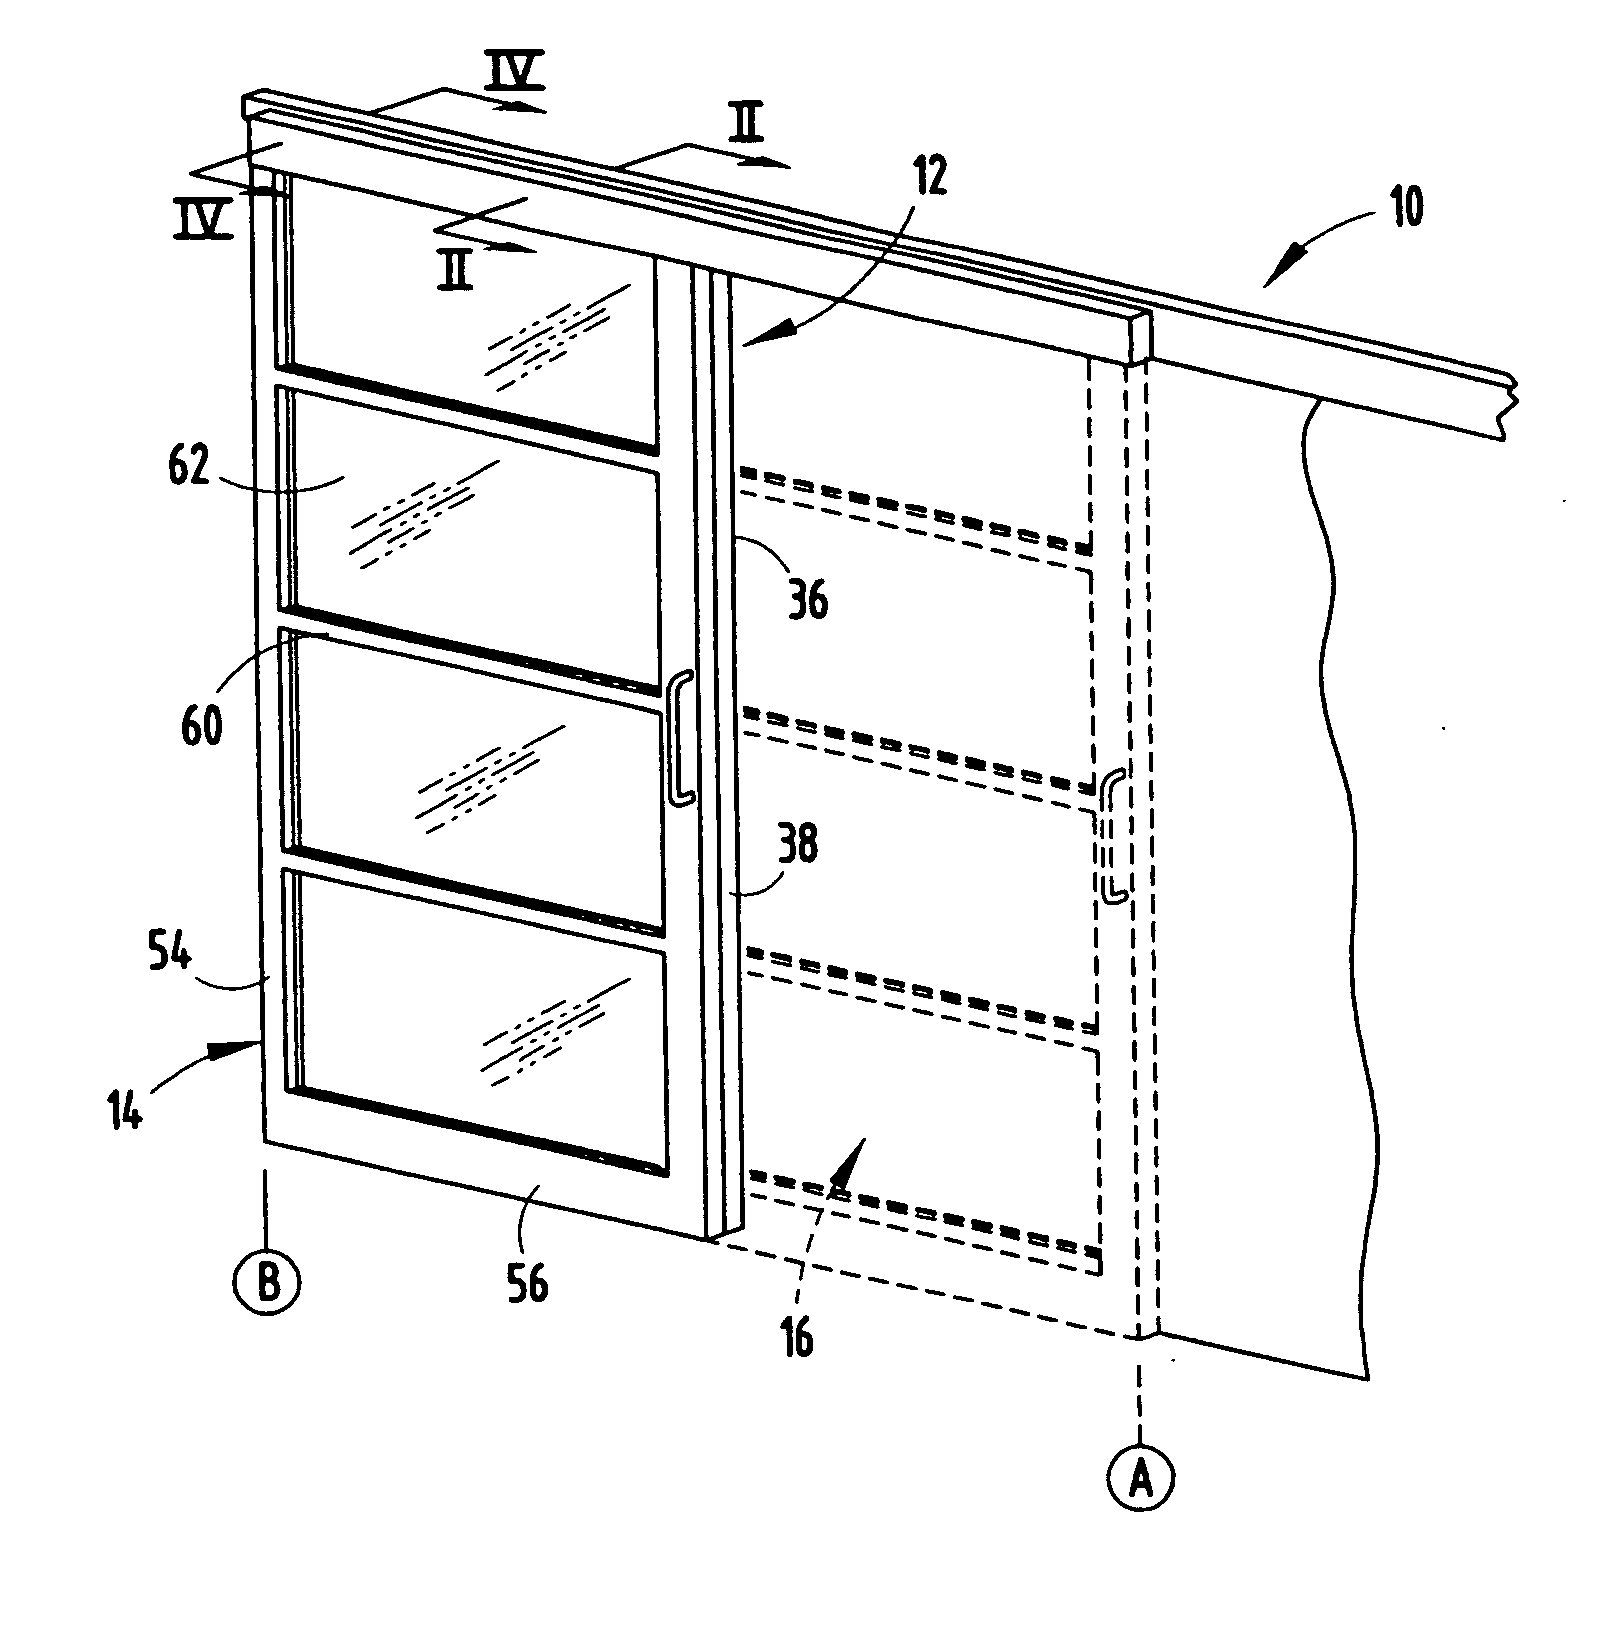 Partition panel assembly